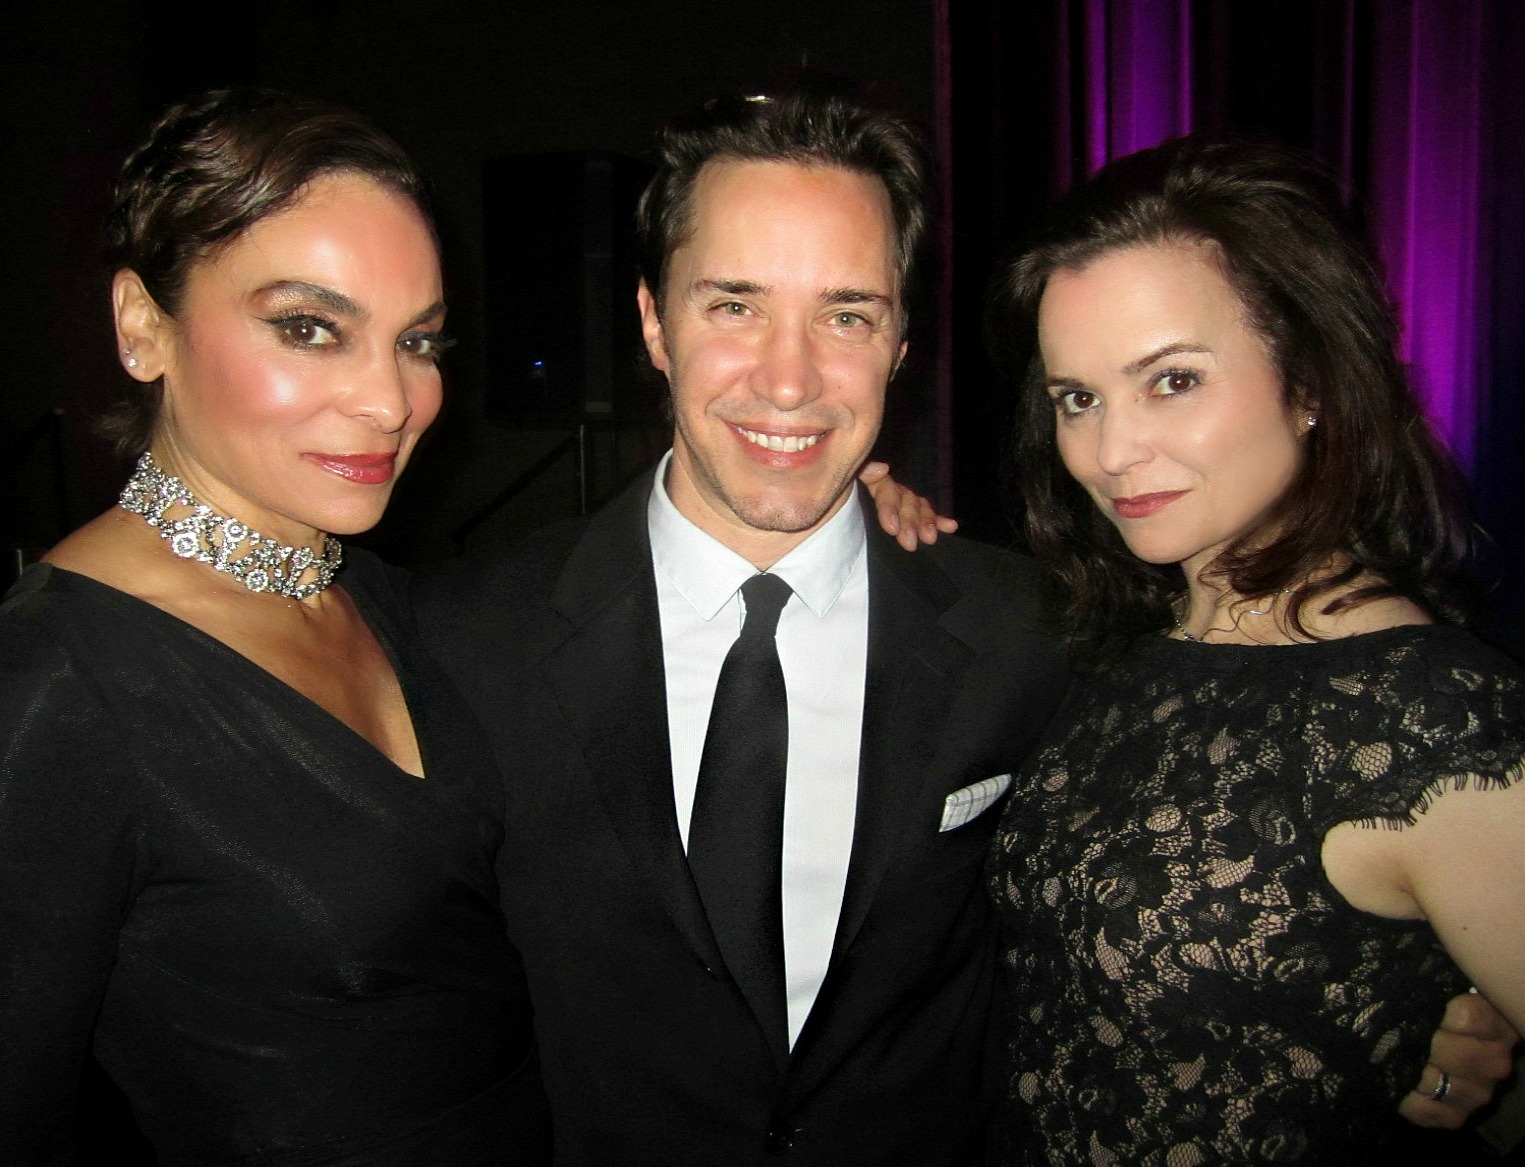 Women in Film and Television Gala with Jasmine Guy and Samantha Worthen